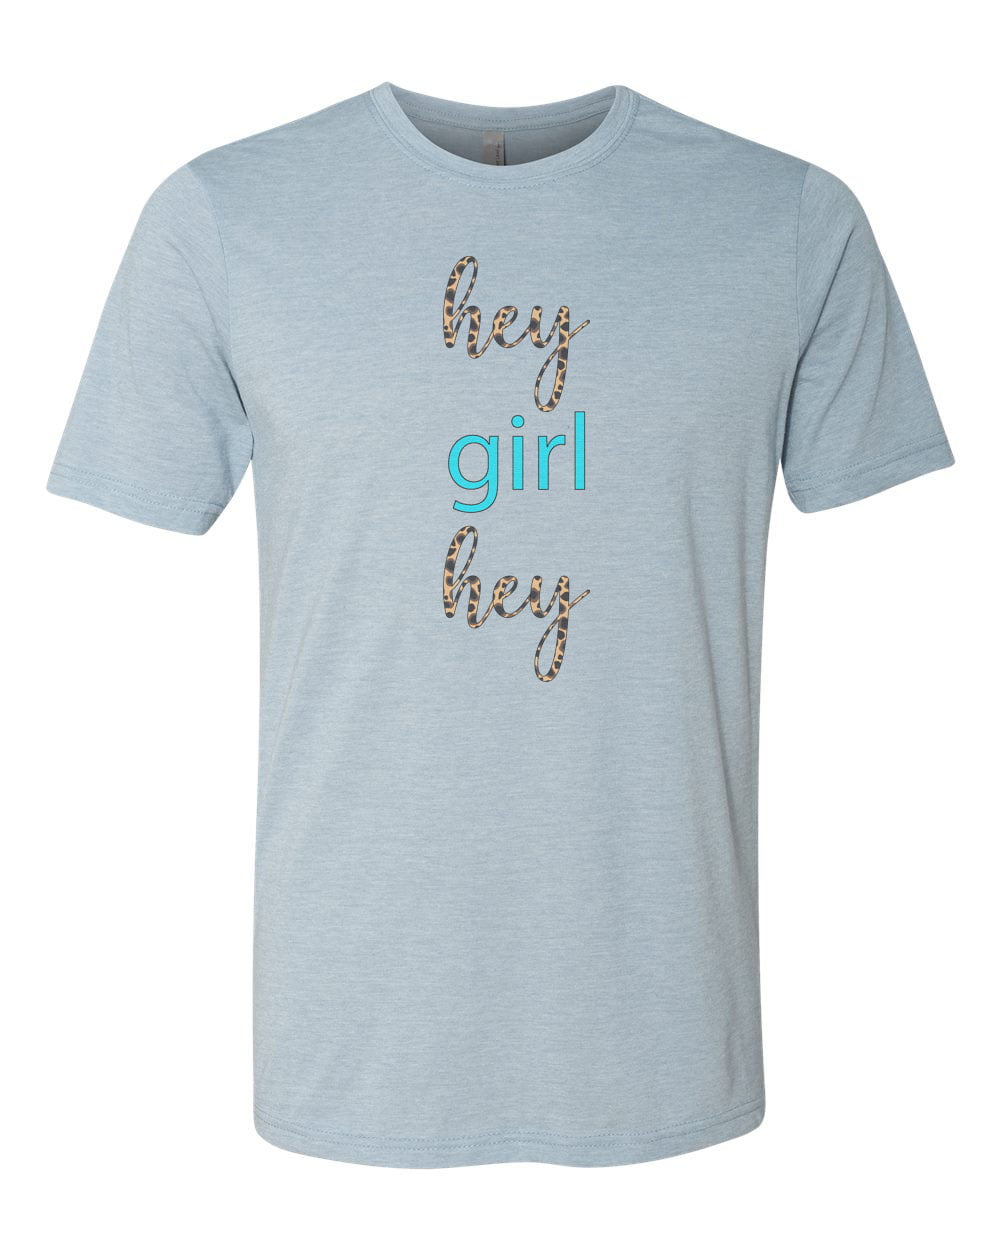 Hey Girl Hey Shirt, Leopard Print, Unisex Fit, Gift For Her, Sublimated  Design, Leopard Print Shirt, Hey Girl Hey, Funny T-shirt, Birthday, Peach,  2XL